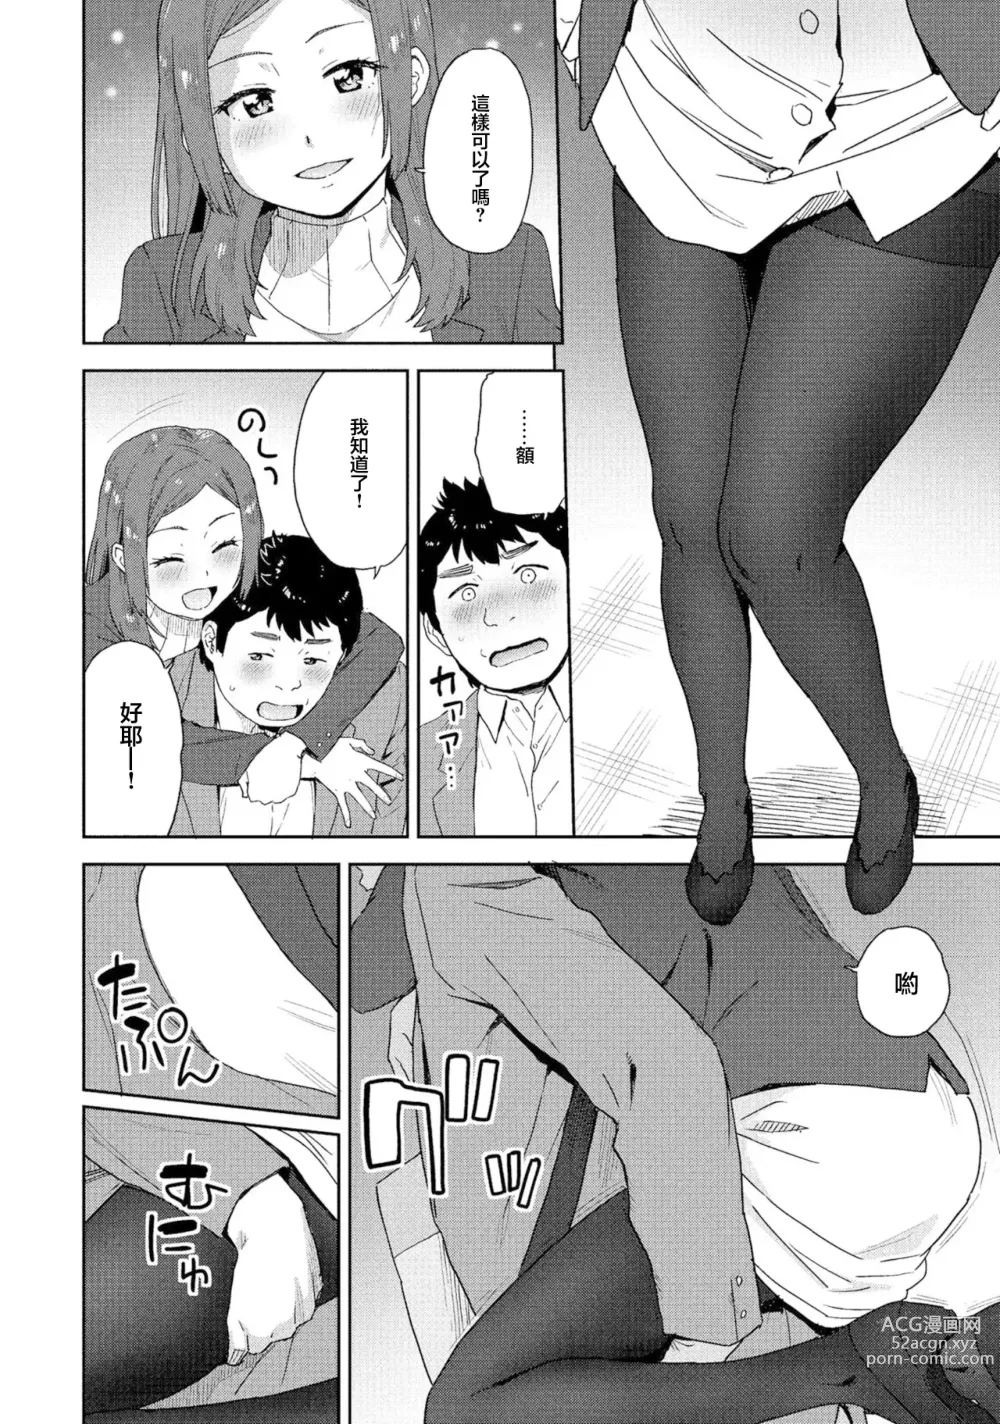 Page 8 of doujinshi 可靠依賴性